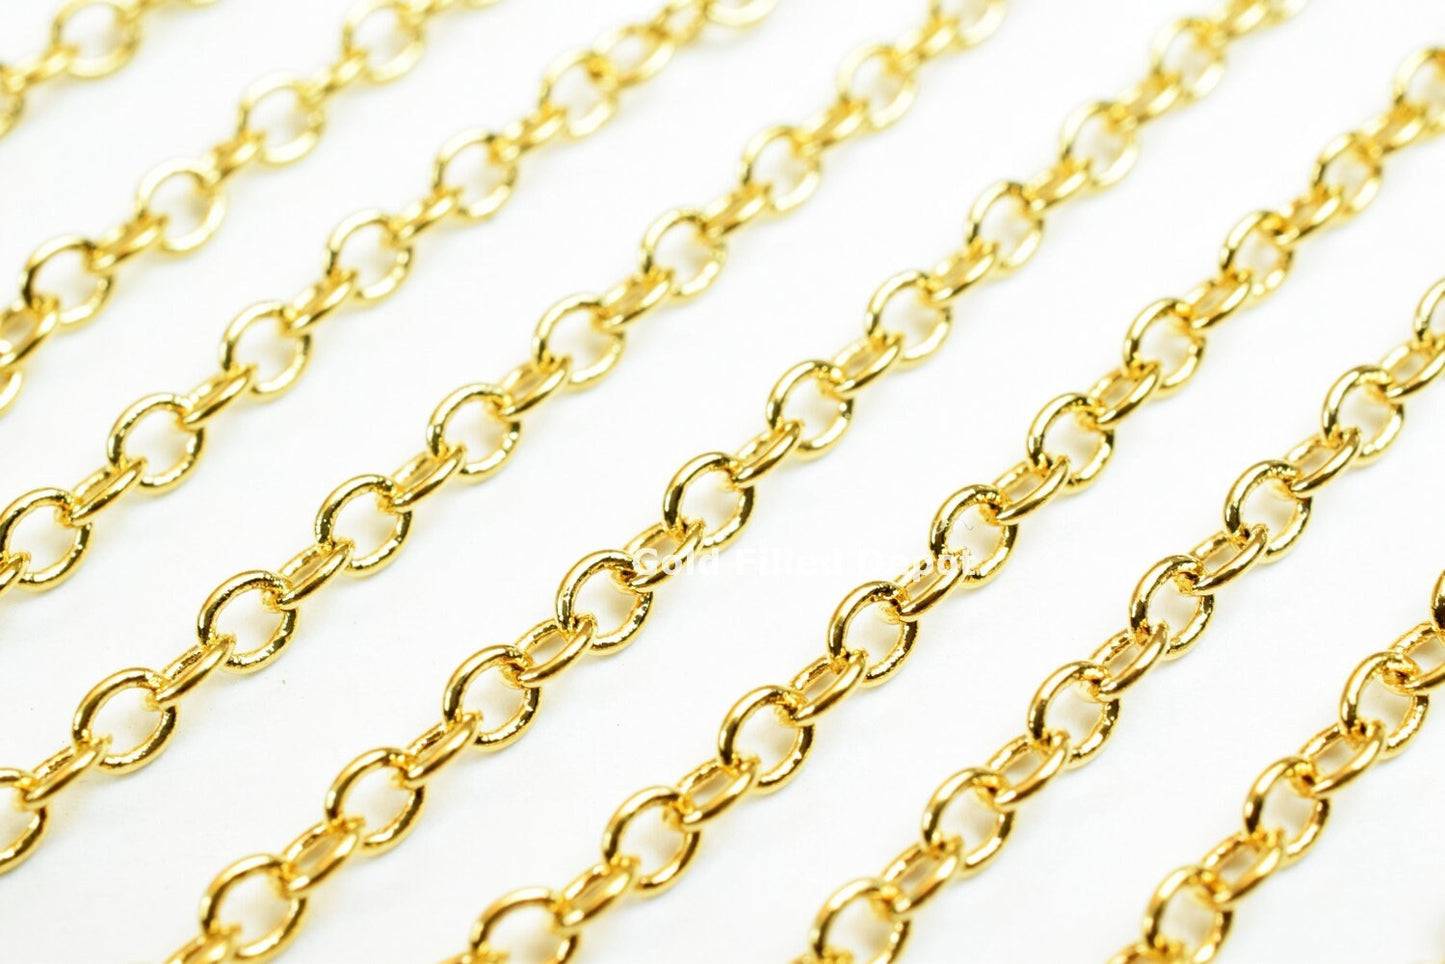 3 Foots 18K Gold Filled Chain Cable Link Chain Width 2mm Thickness 0.25mm Gold-Filled finding for Gold Filled Jewelry Making